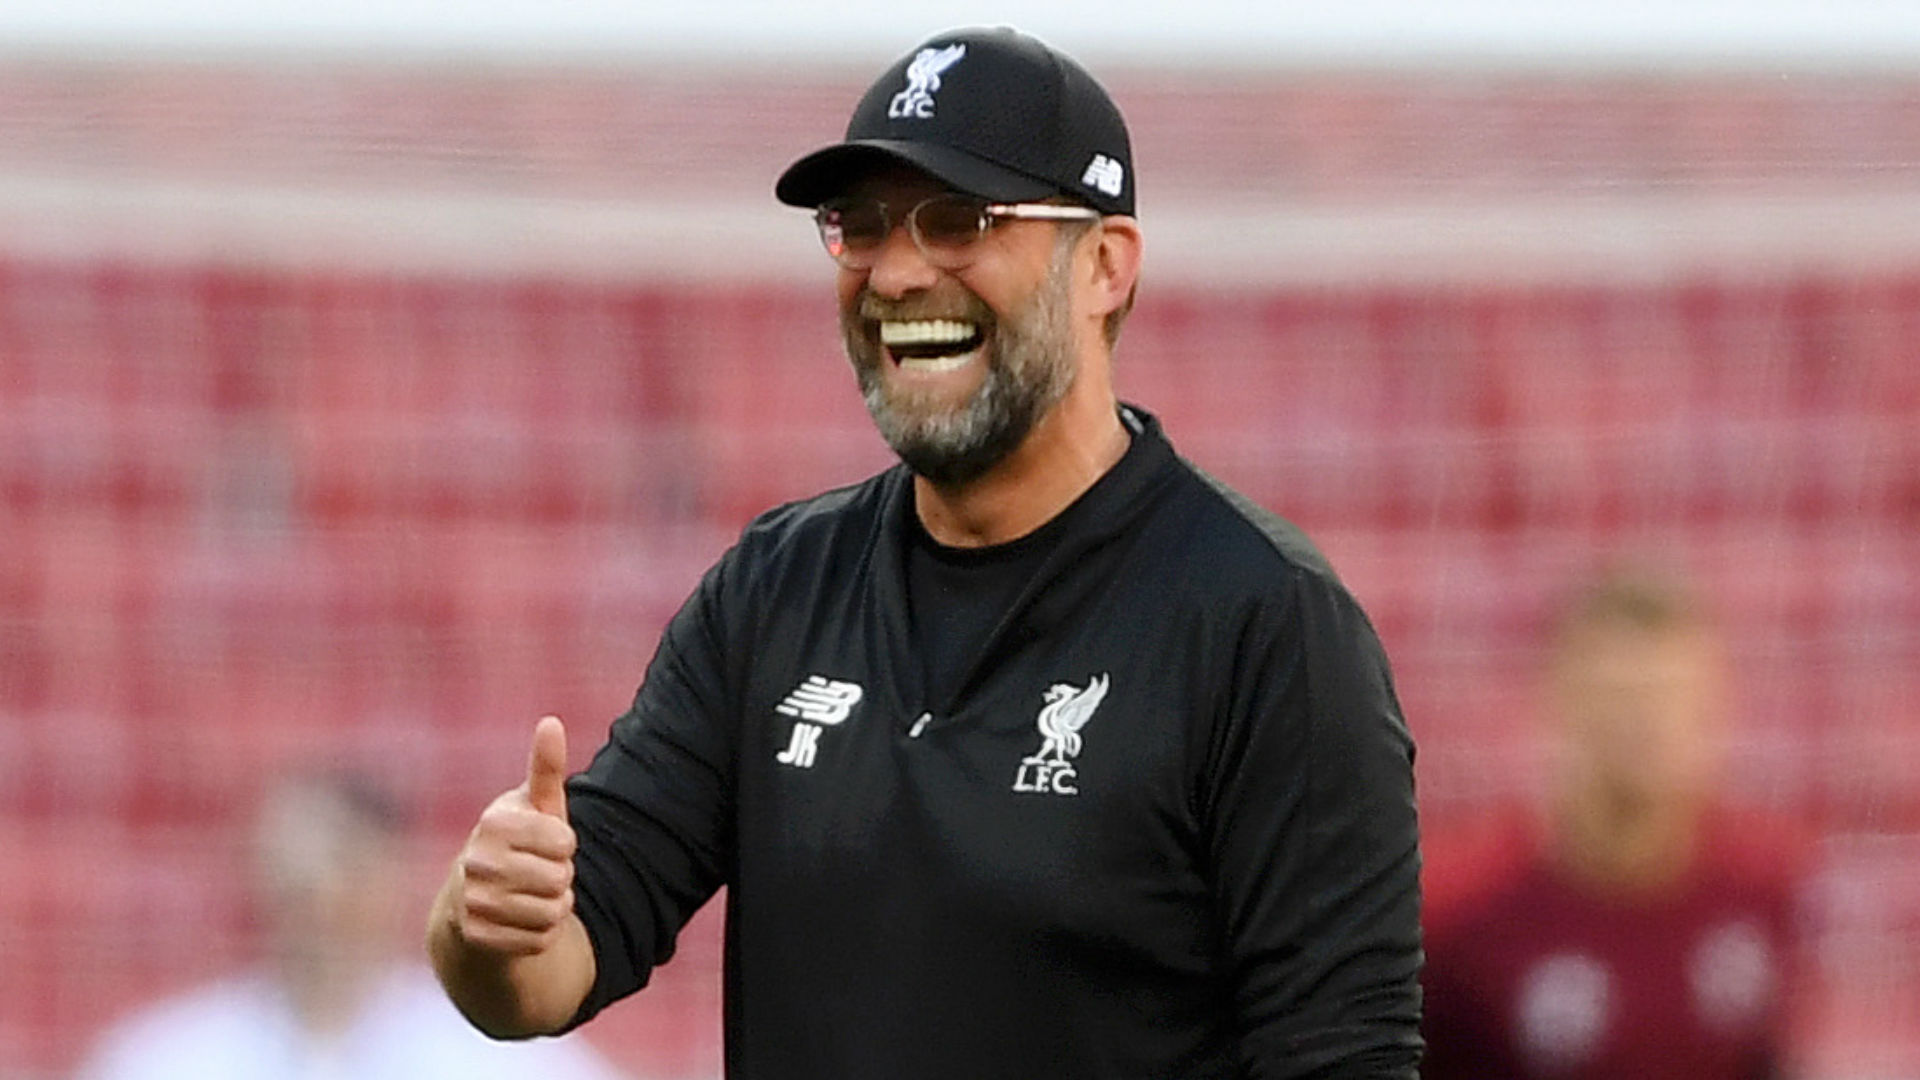 Joey Tribbiani is a smooth talker, but Jurgen Klopp insists he is smarter than the Friends character who helped teach him English.